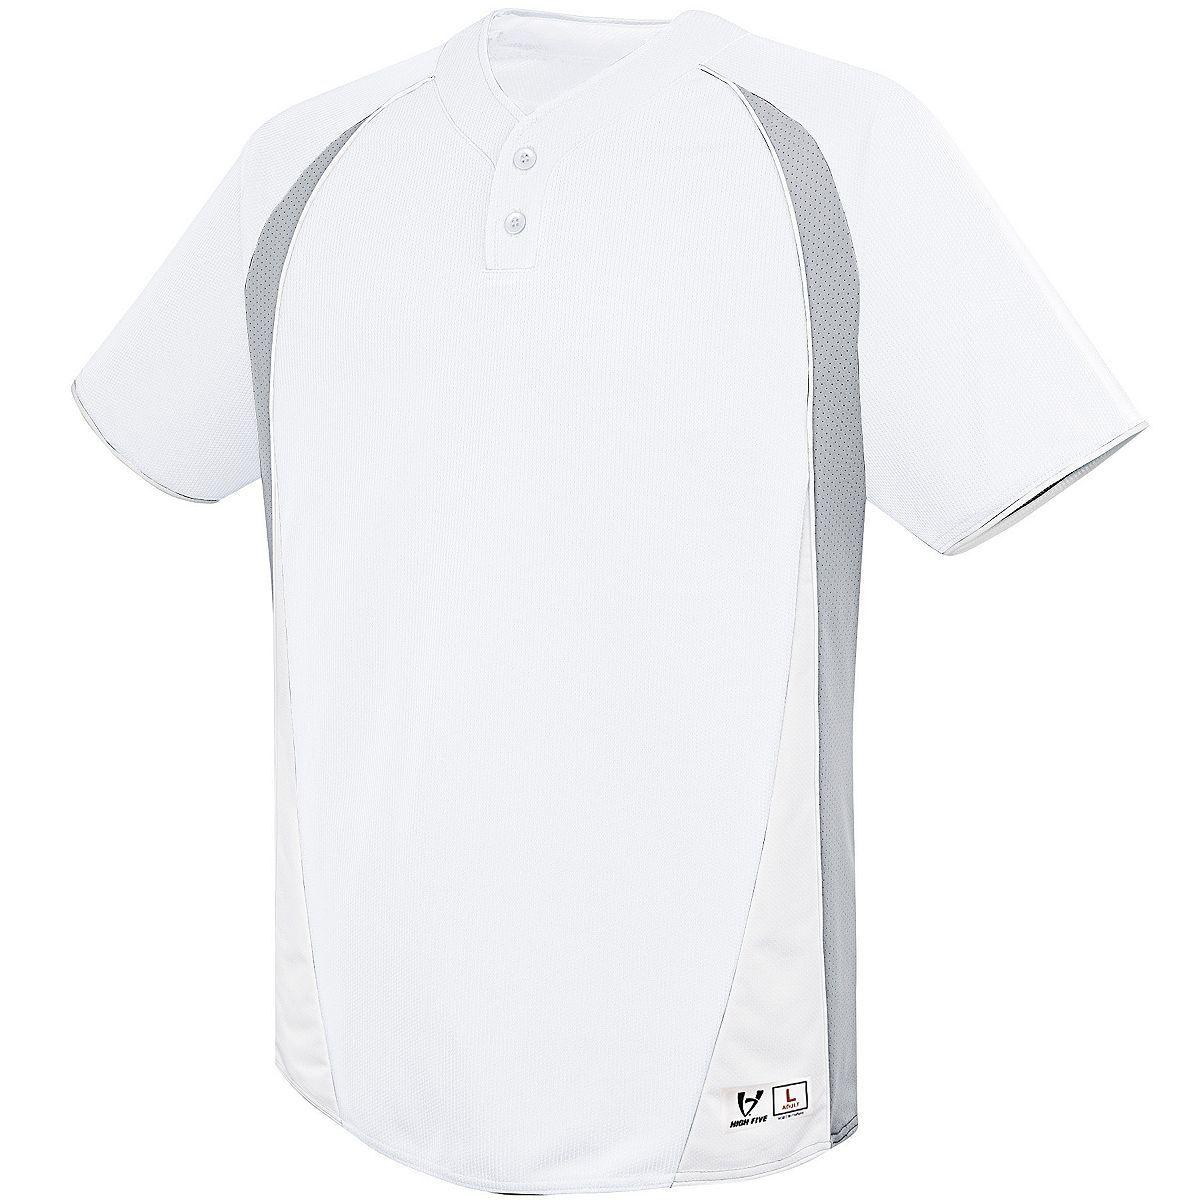 Augusta Sportswear Youth Ace Two-Button Jersey in White/Silver Grey/White  -Part of the Youth, Youth-Jersey, Augusta-Products, Baseball, Shirts, All-Sports, All-Sports-1 product lines at KanaleyCreations.com